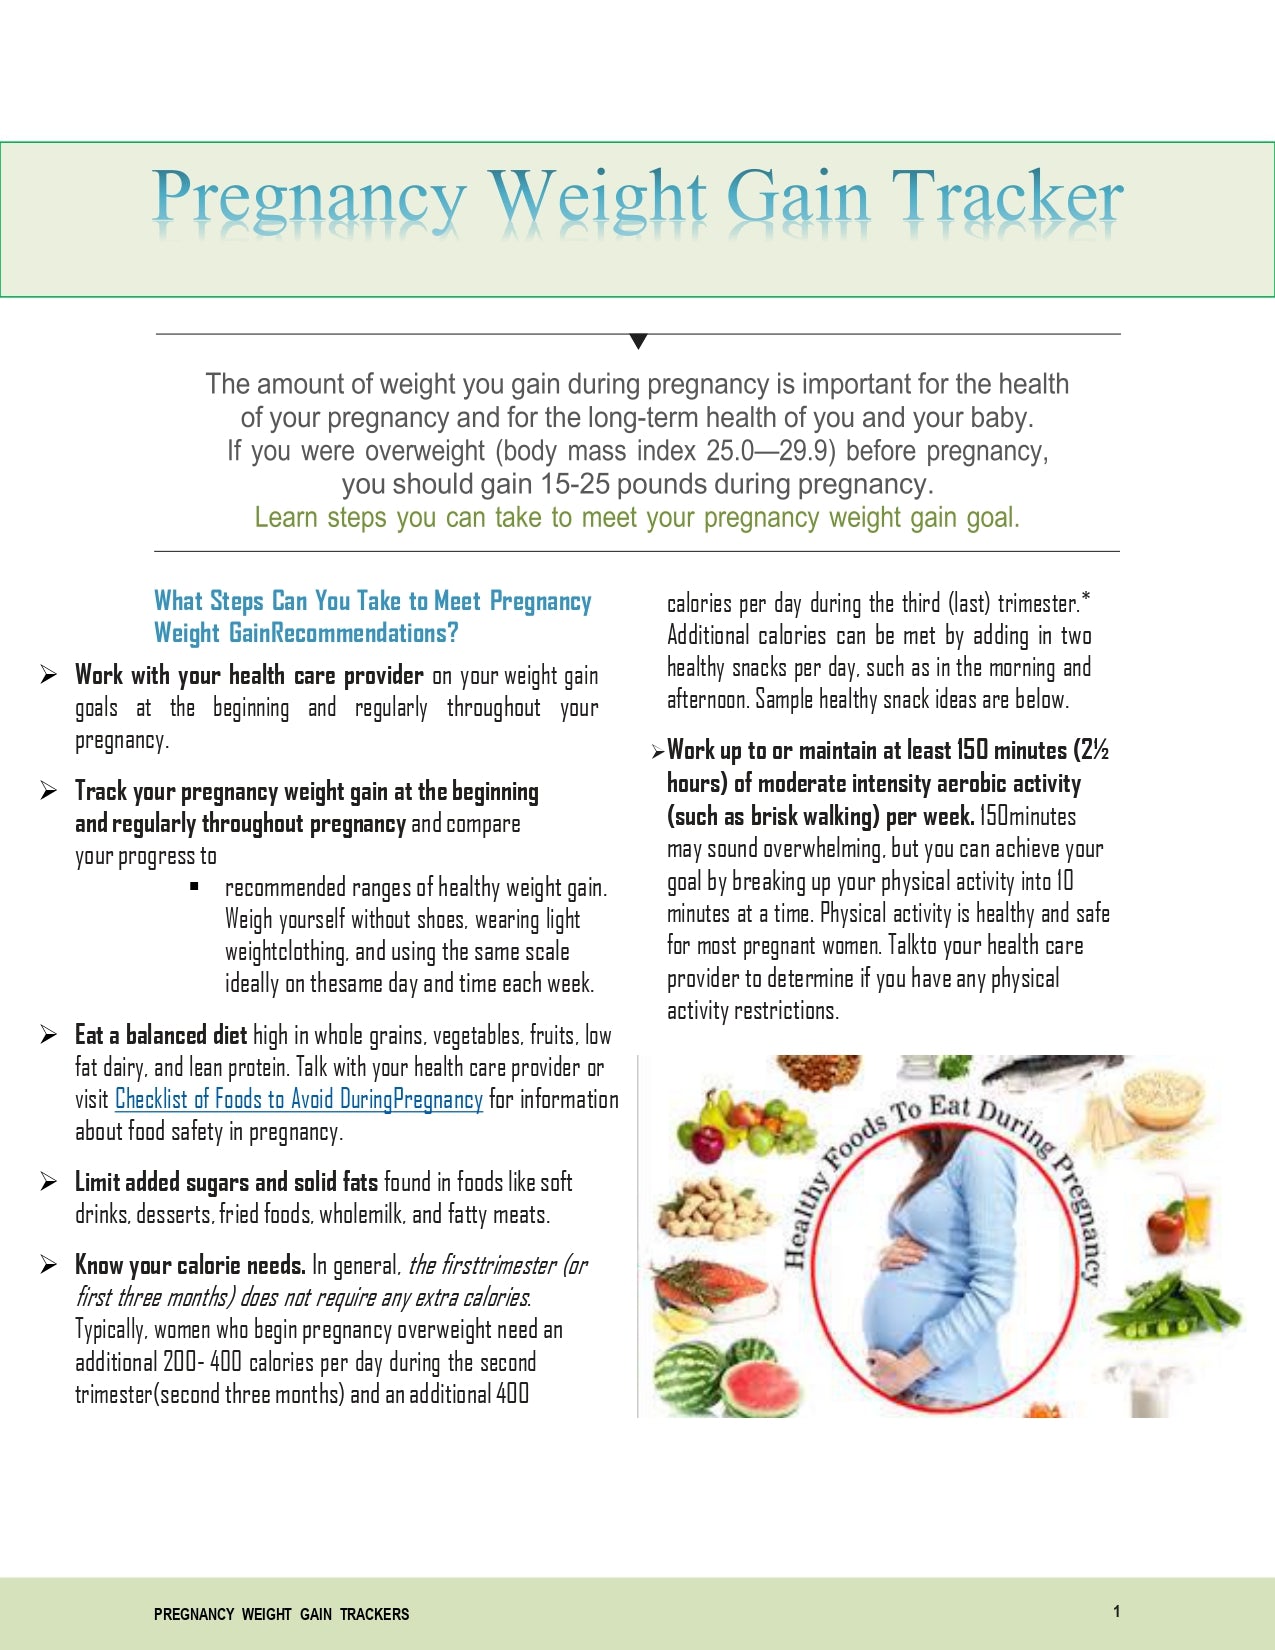 Pregnancy Weight Gain Tracker and Chart